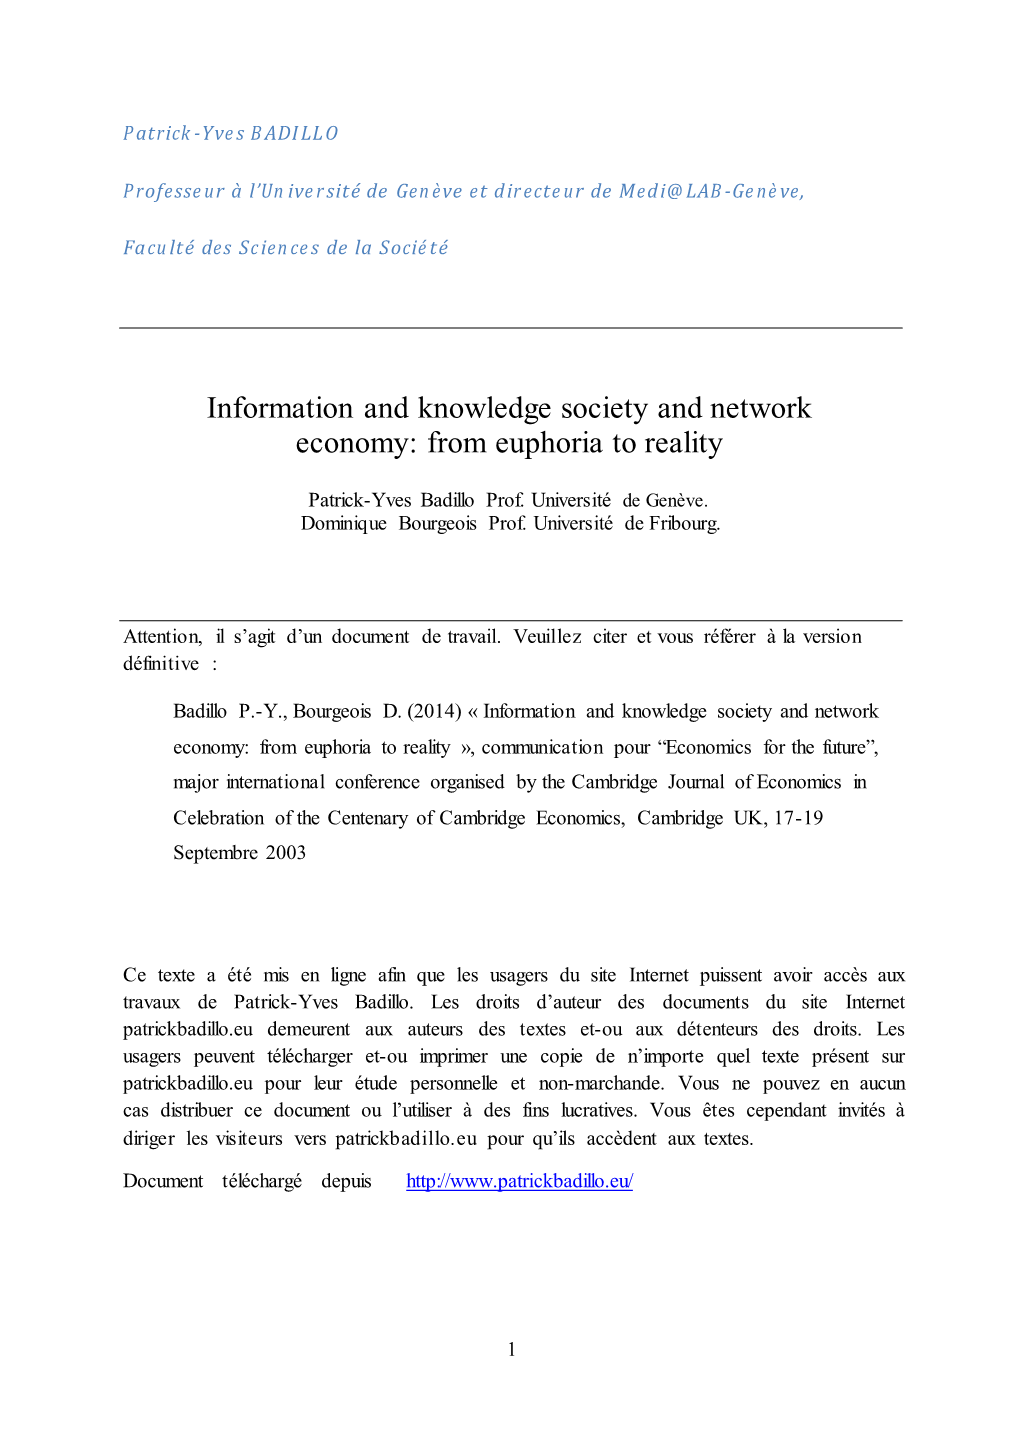 Information and Knowledge Society and Network Economy: from Euphoria to Reality